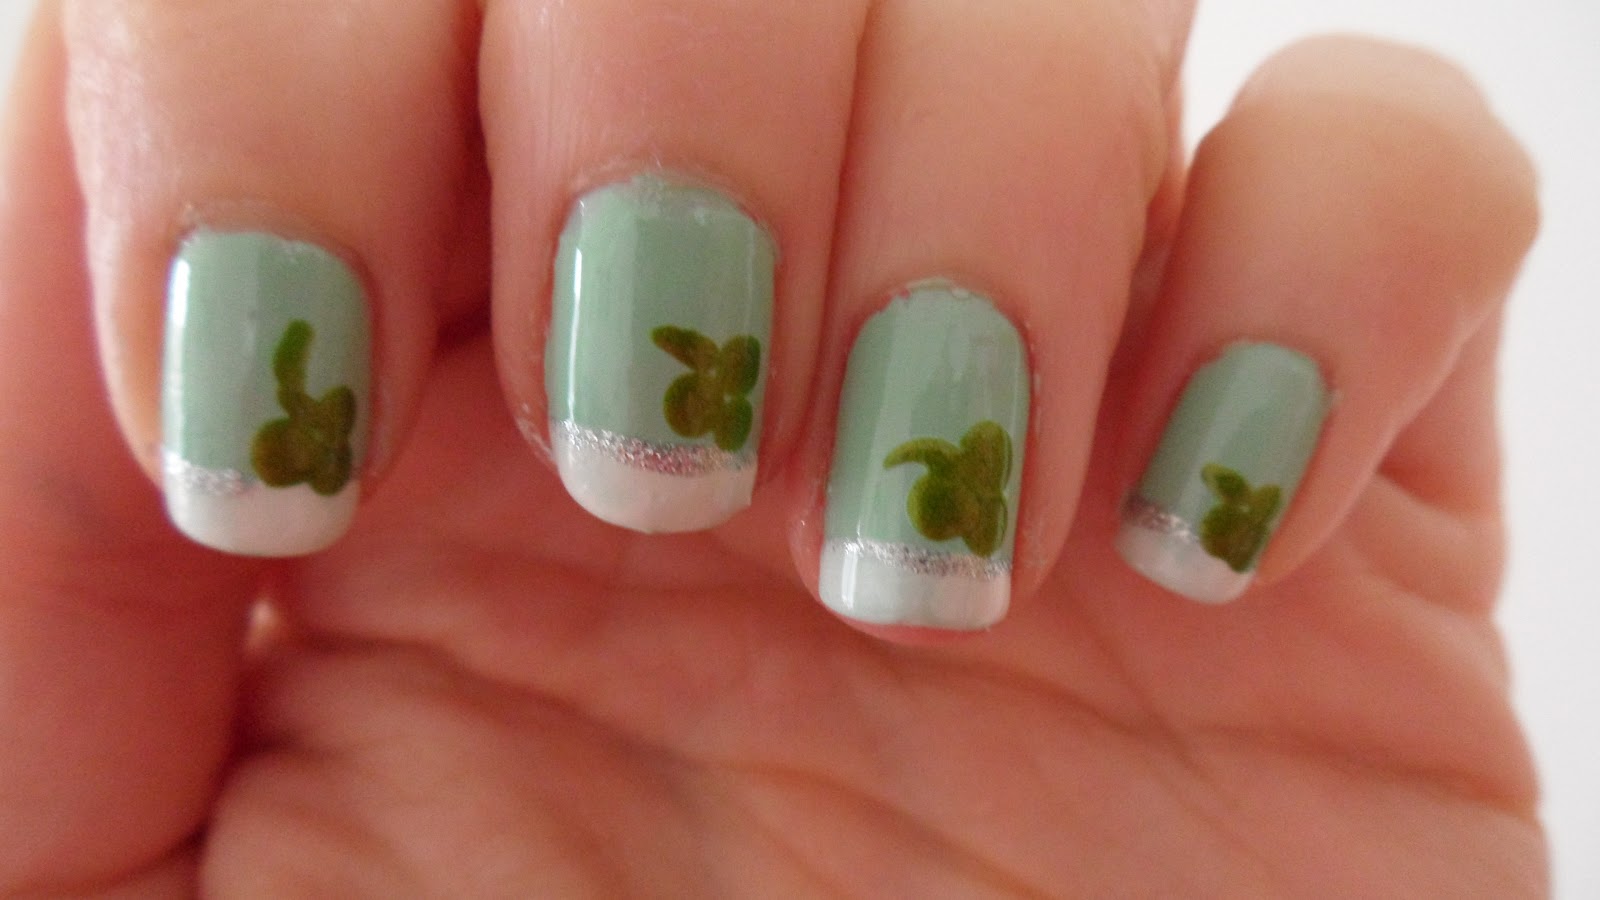 3. "Shamrock Nail Designs for St. Patrick's Day" - wide 5